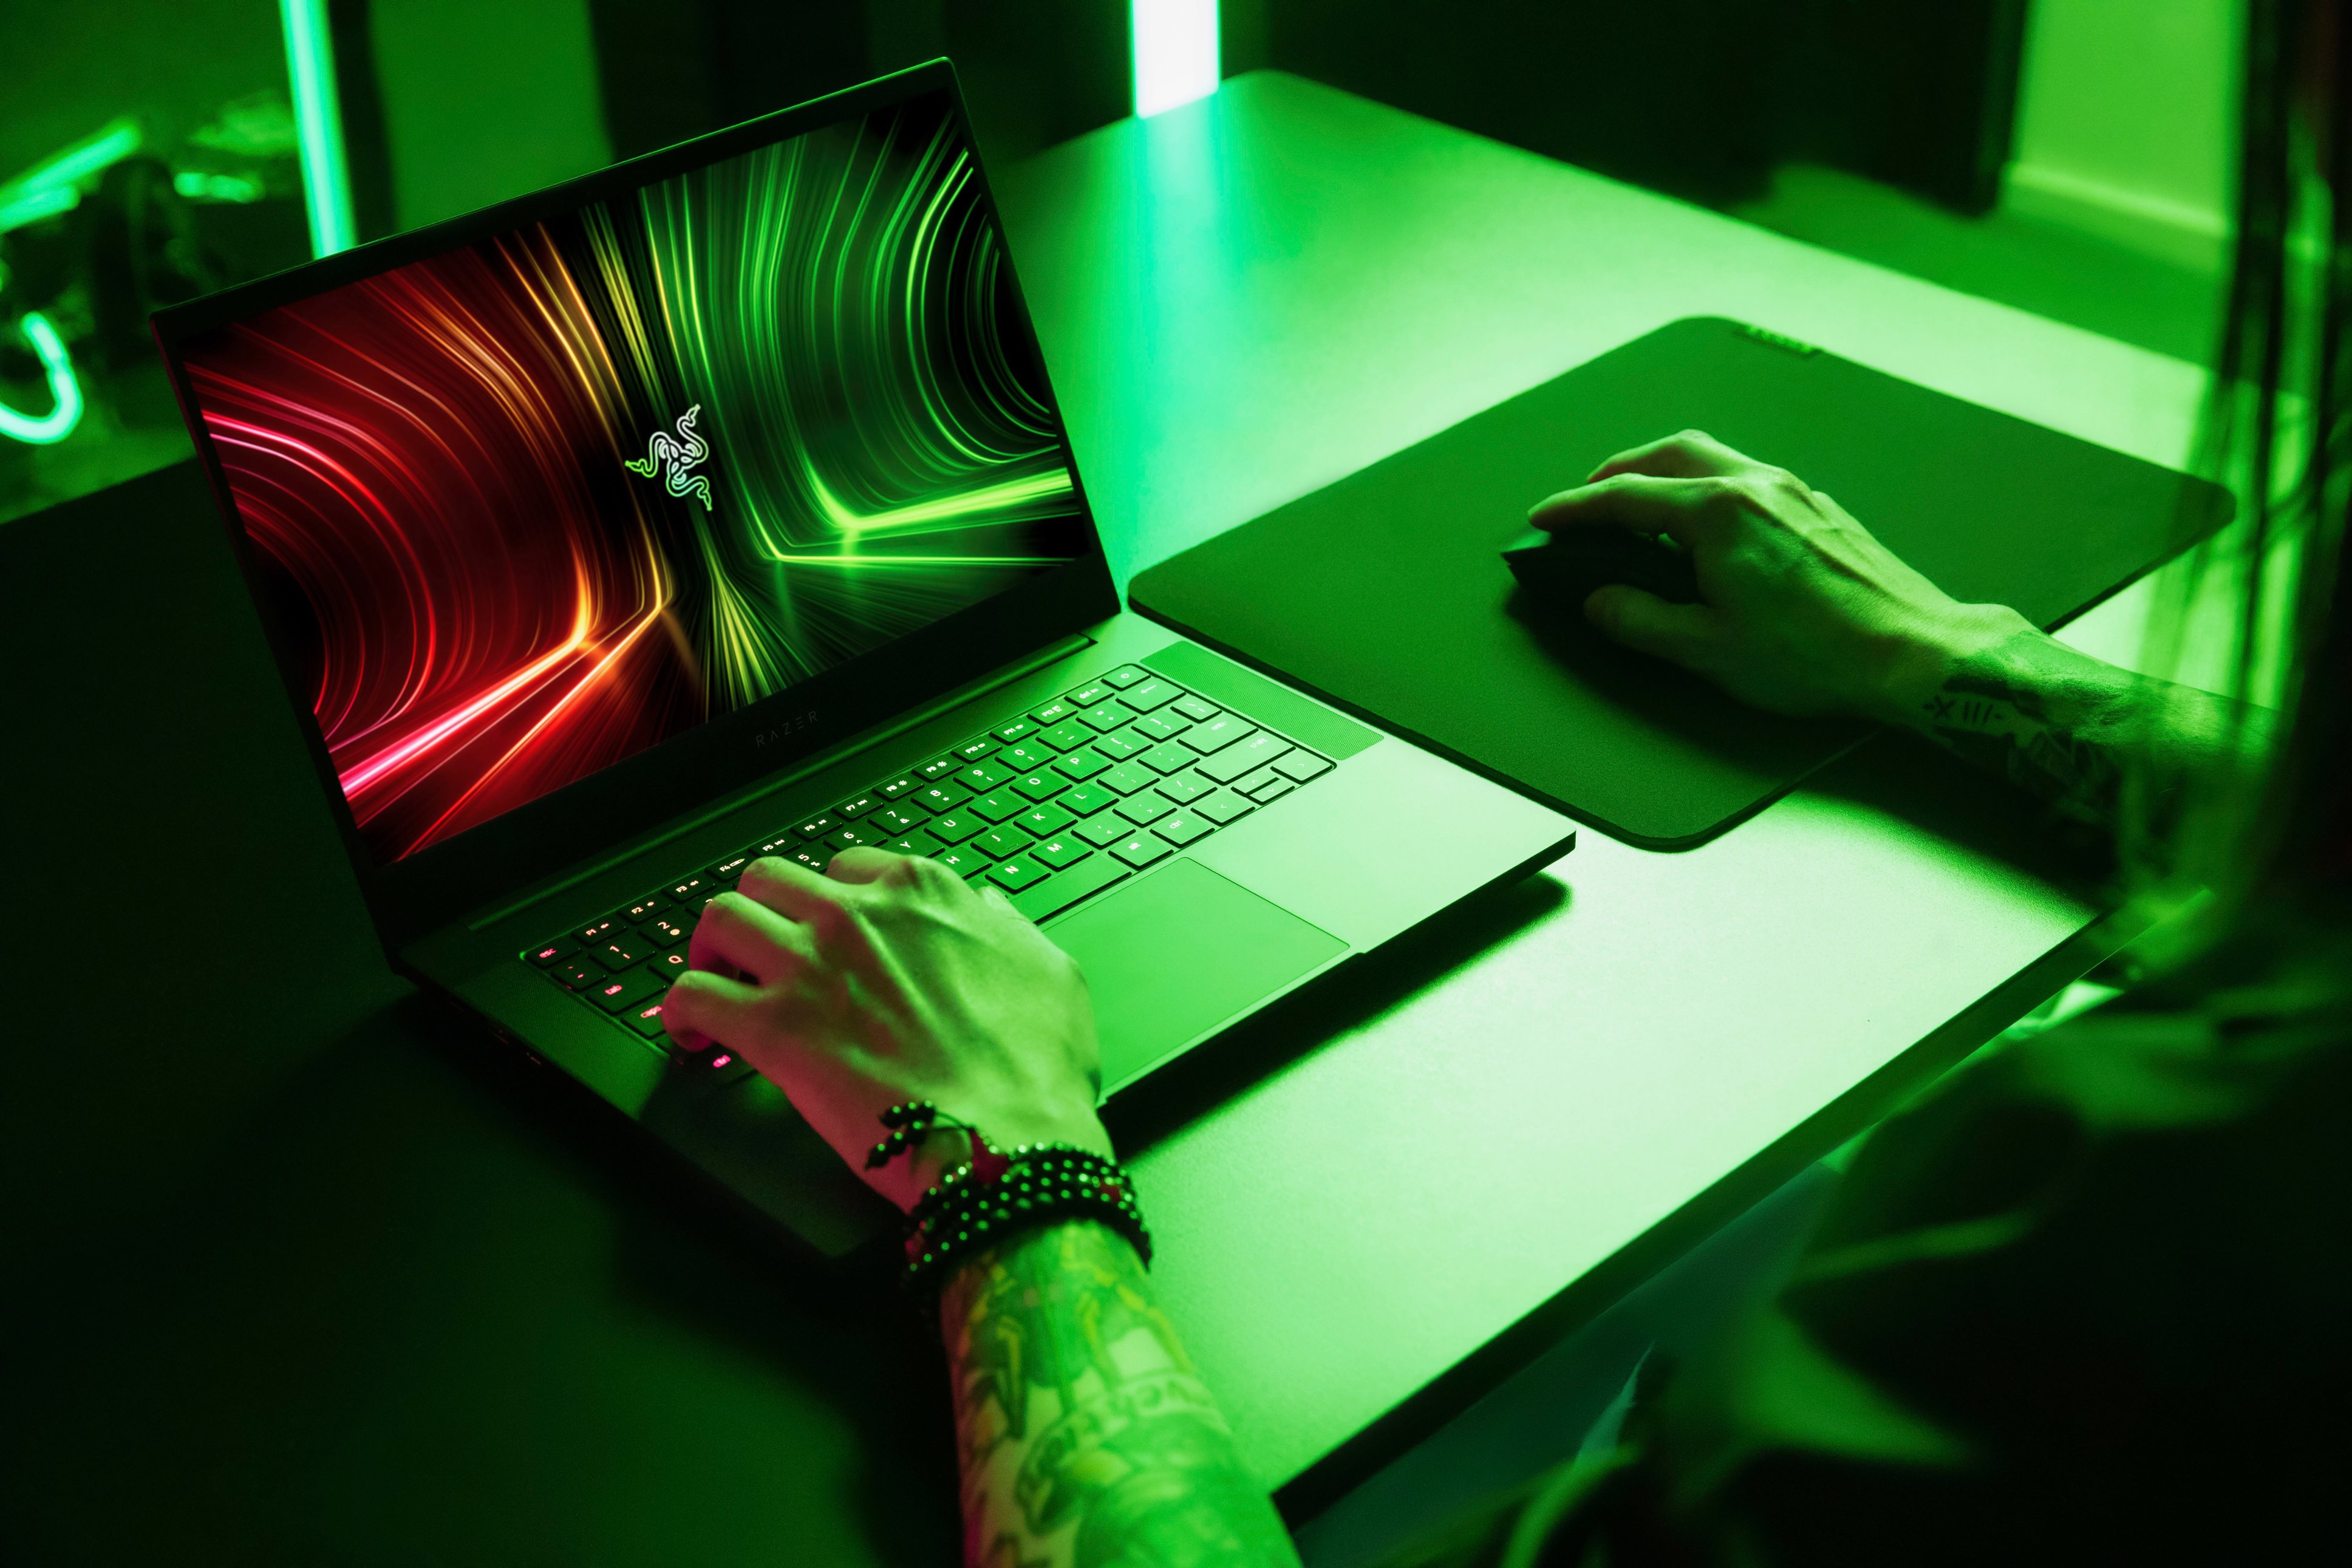 R Λ Z Ξ R on X: Give your desktop a fresh look with the 'Razer Fusion',  our official Razer Blade 14” wallpaper that sports a design that unites red  and green